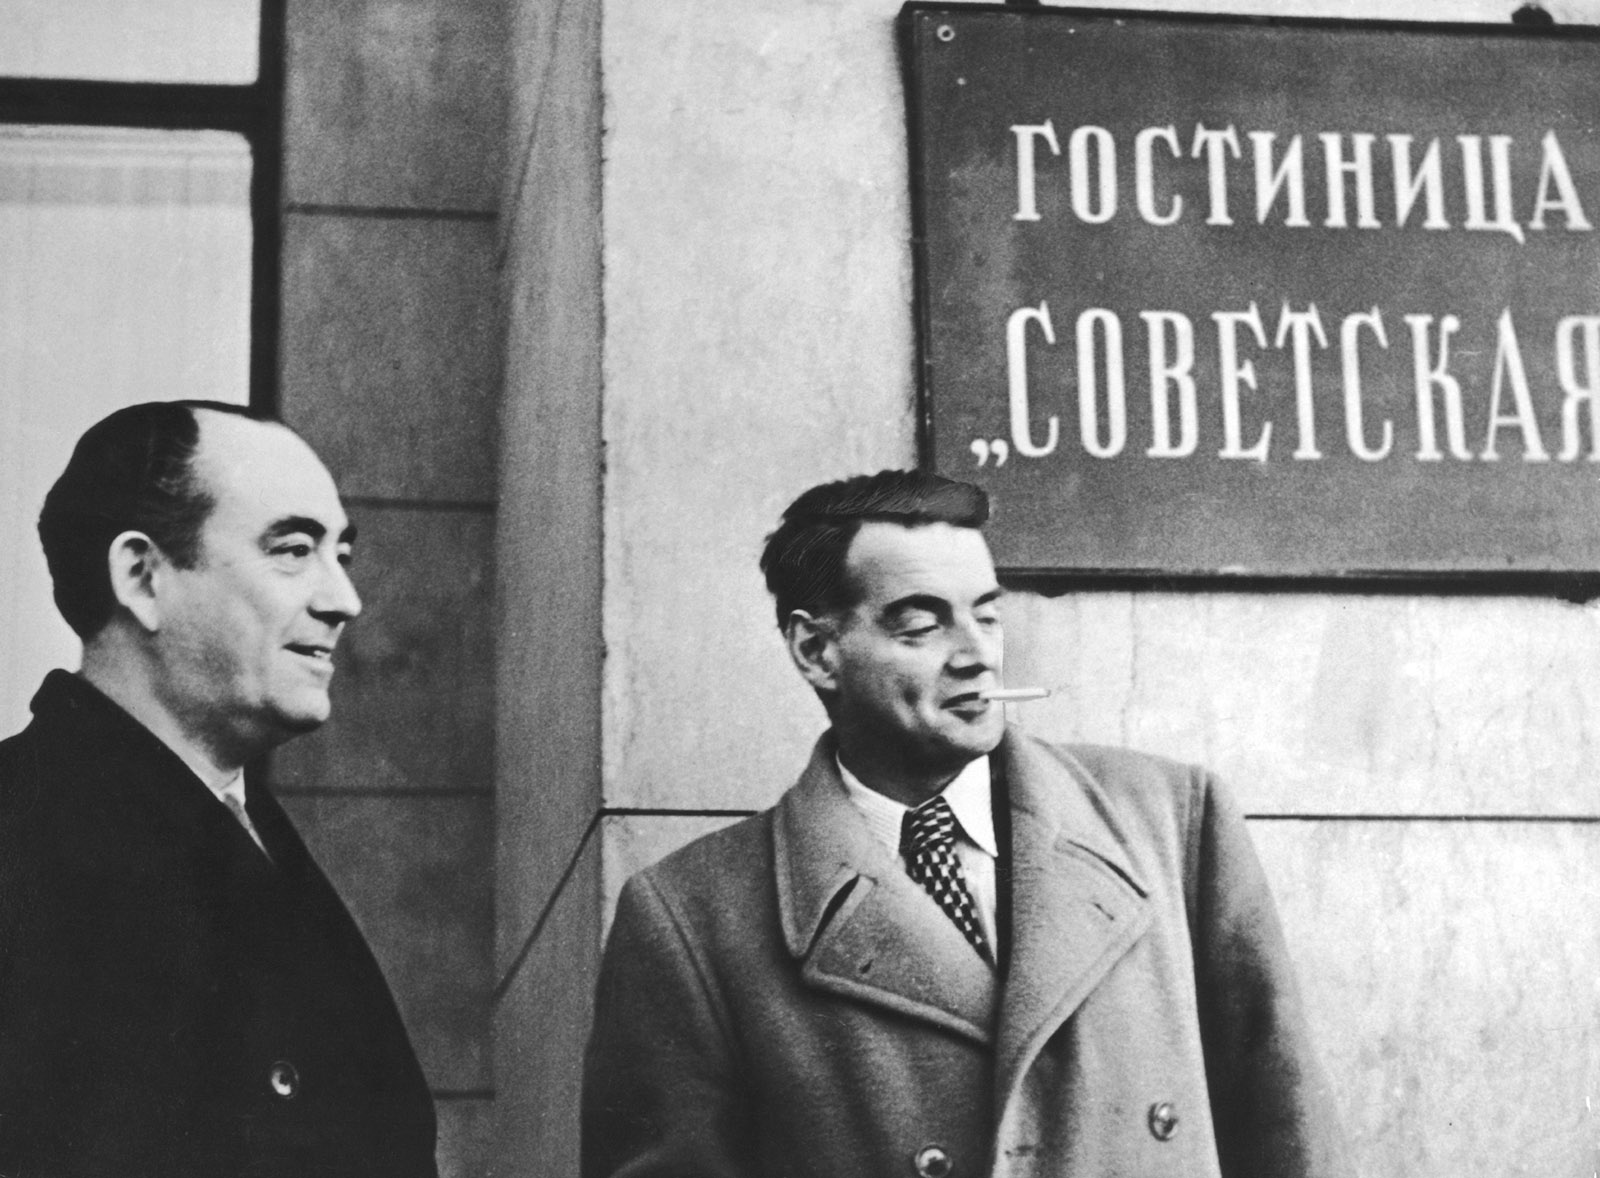 Guy Burgess (right) with the British journalist Tom Driberg, who flew to Moscow after Burgess’s defection to interview him for a biography, August 1956